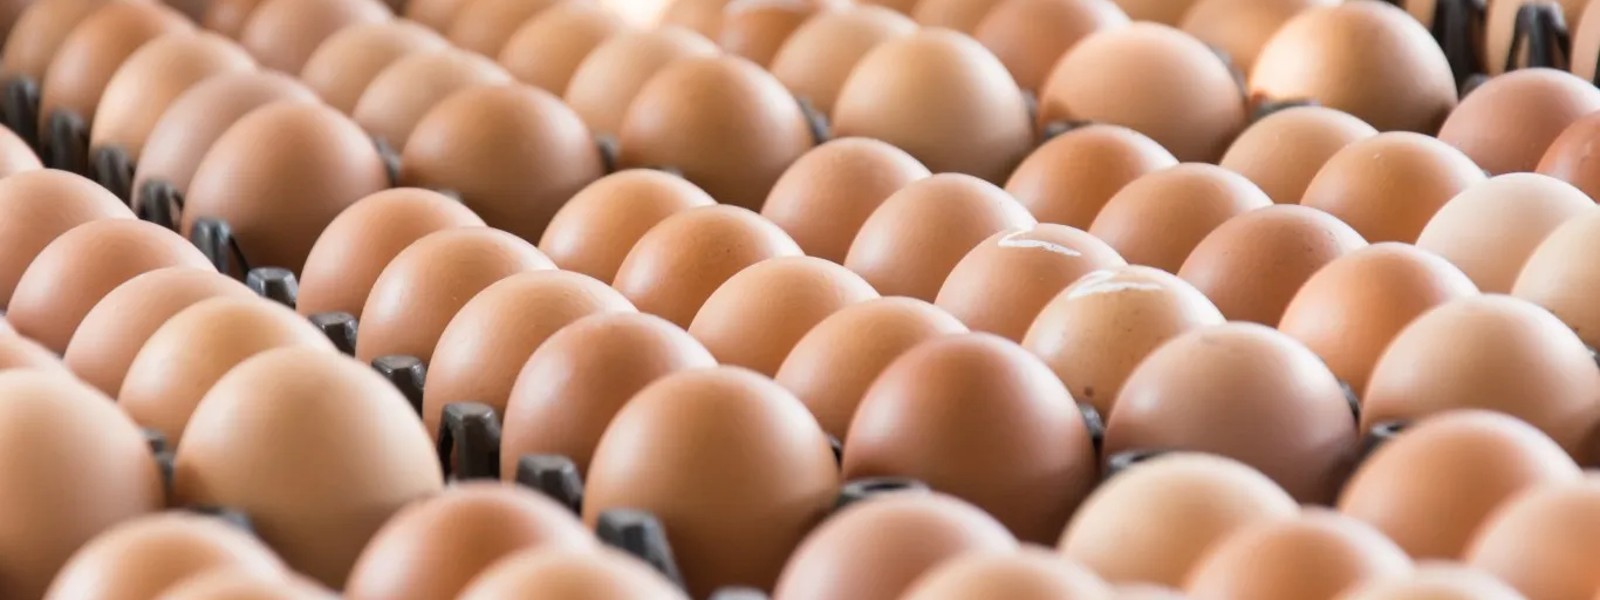 Egg prices: Discussion between authorities due